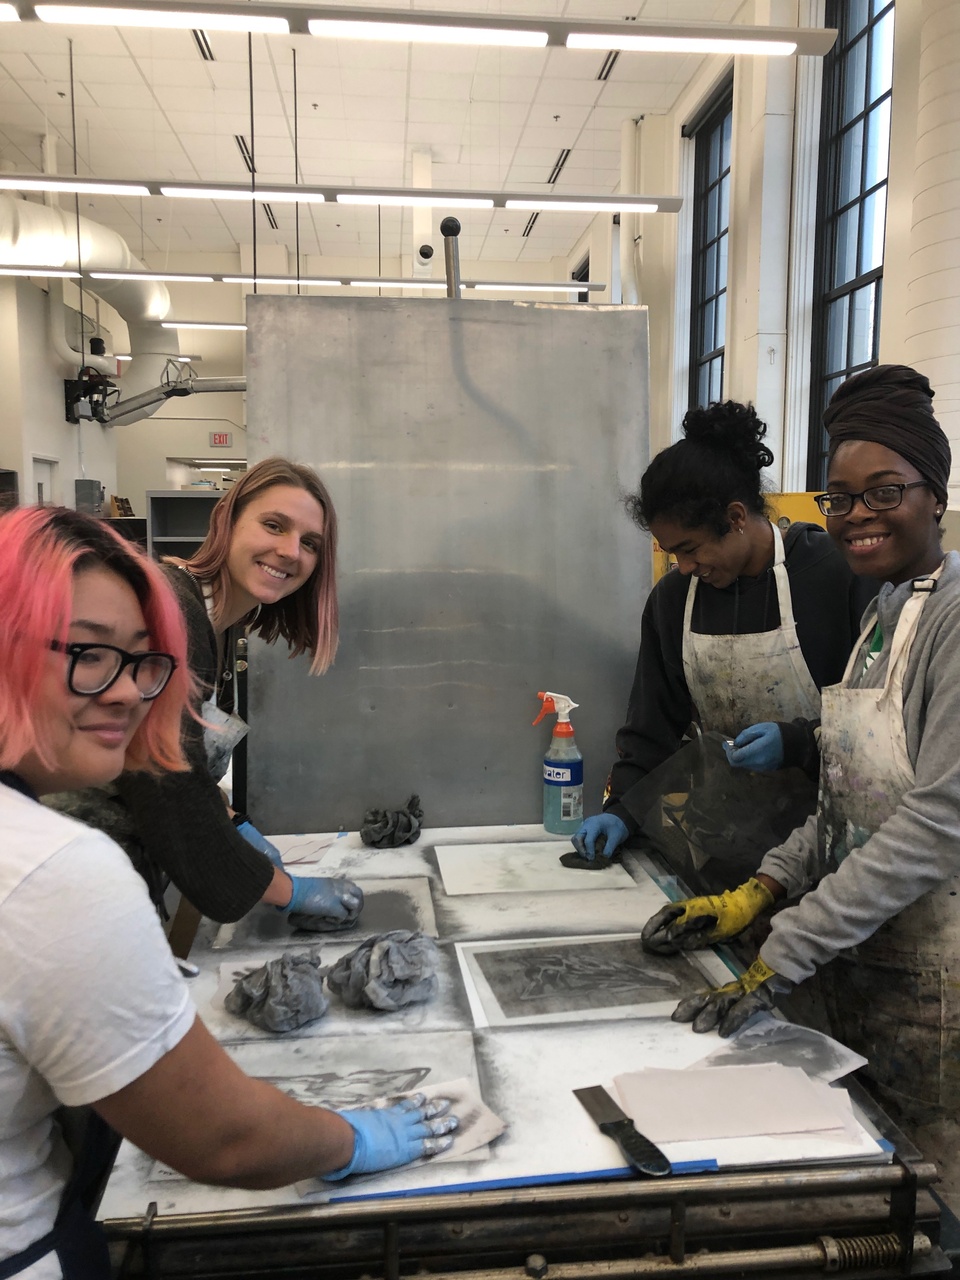 Students working on artist project at the press